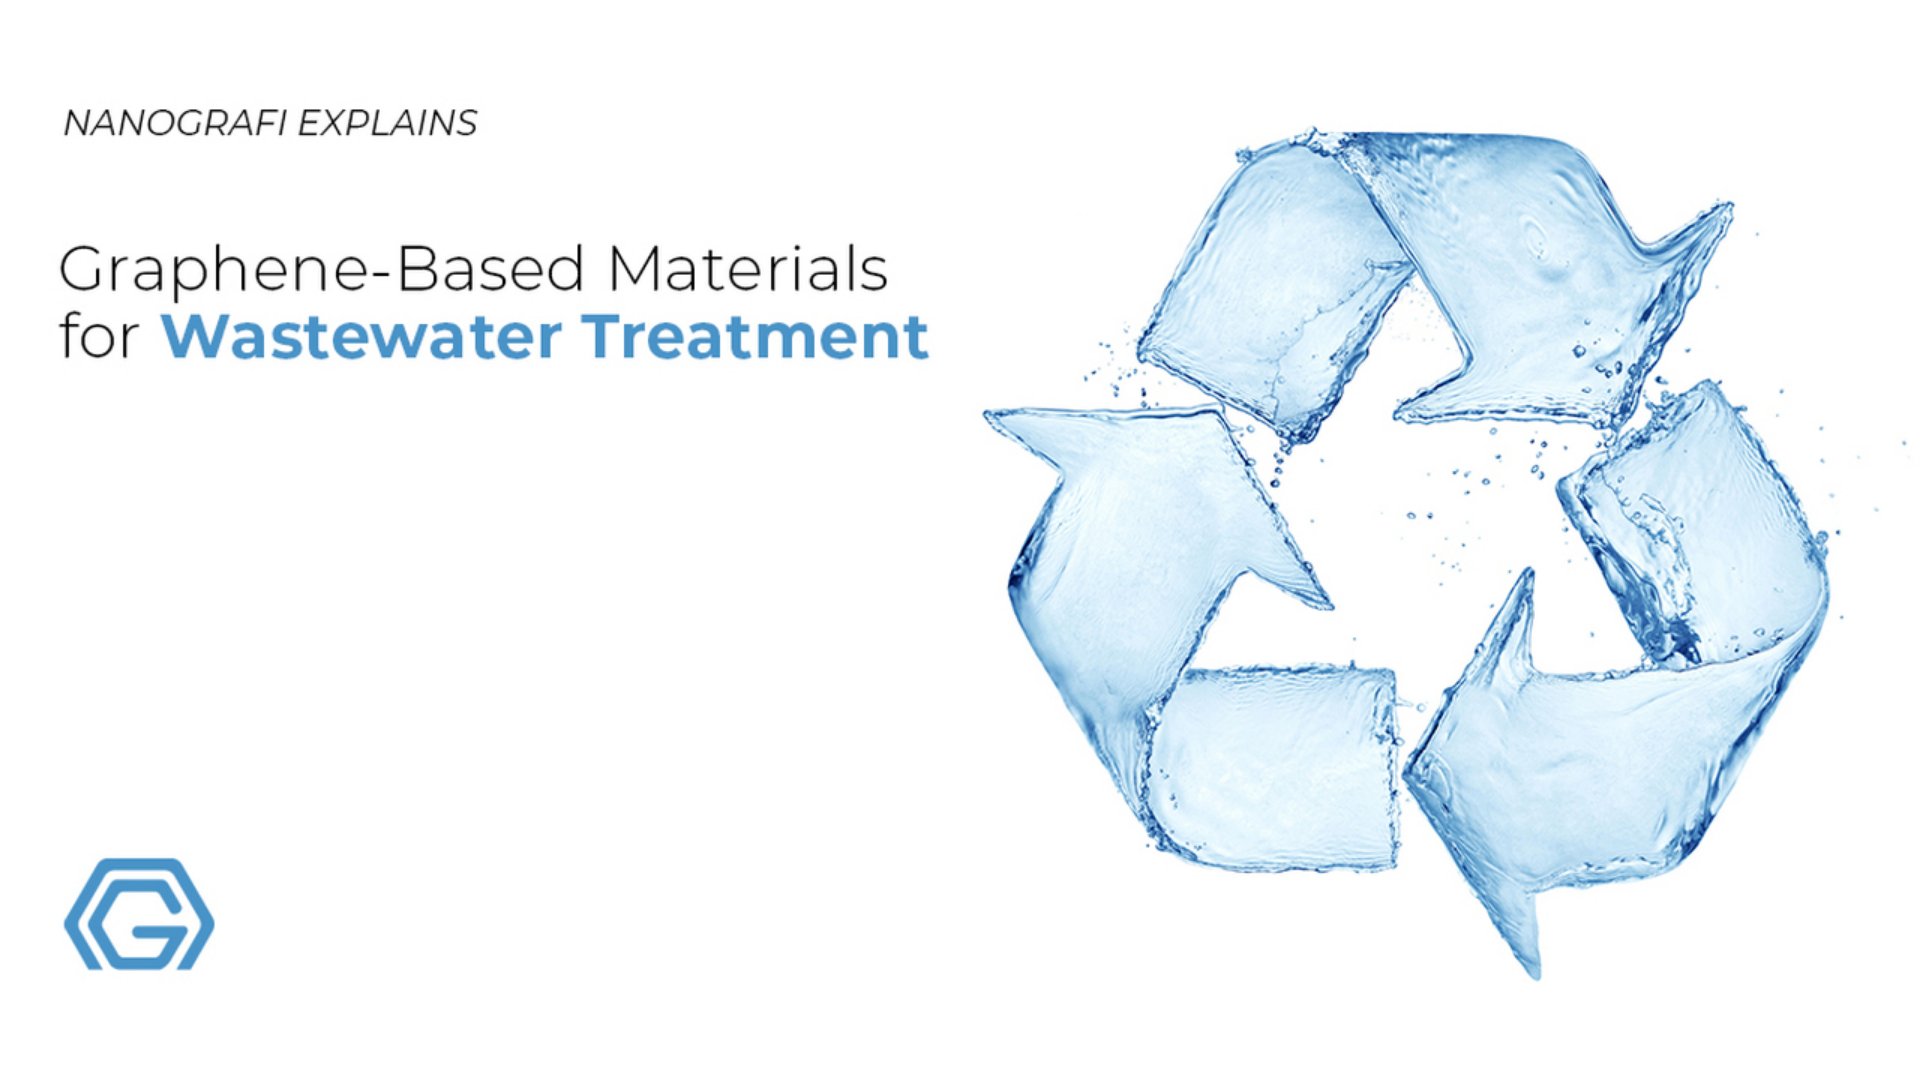 Graphene-based materials for wastewater treatment